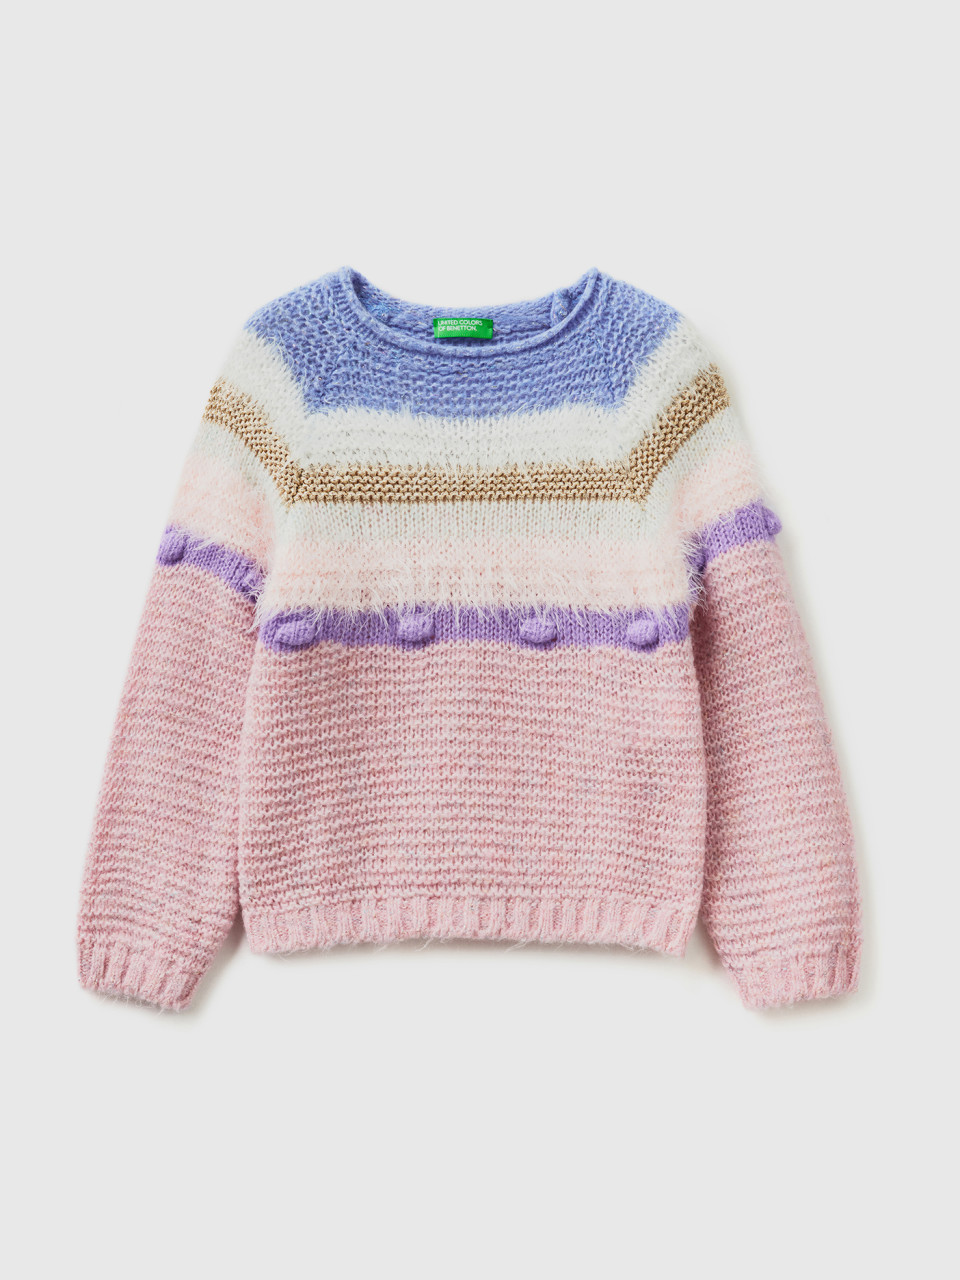 Benetton, Striped Sweater With Lurex, Multi-color, Kids